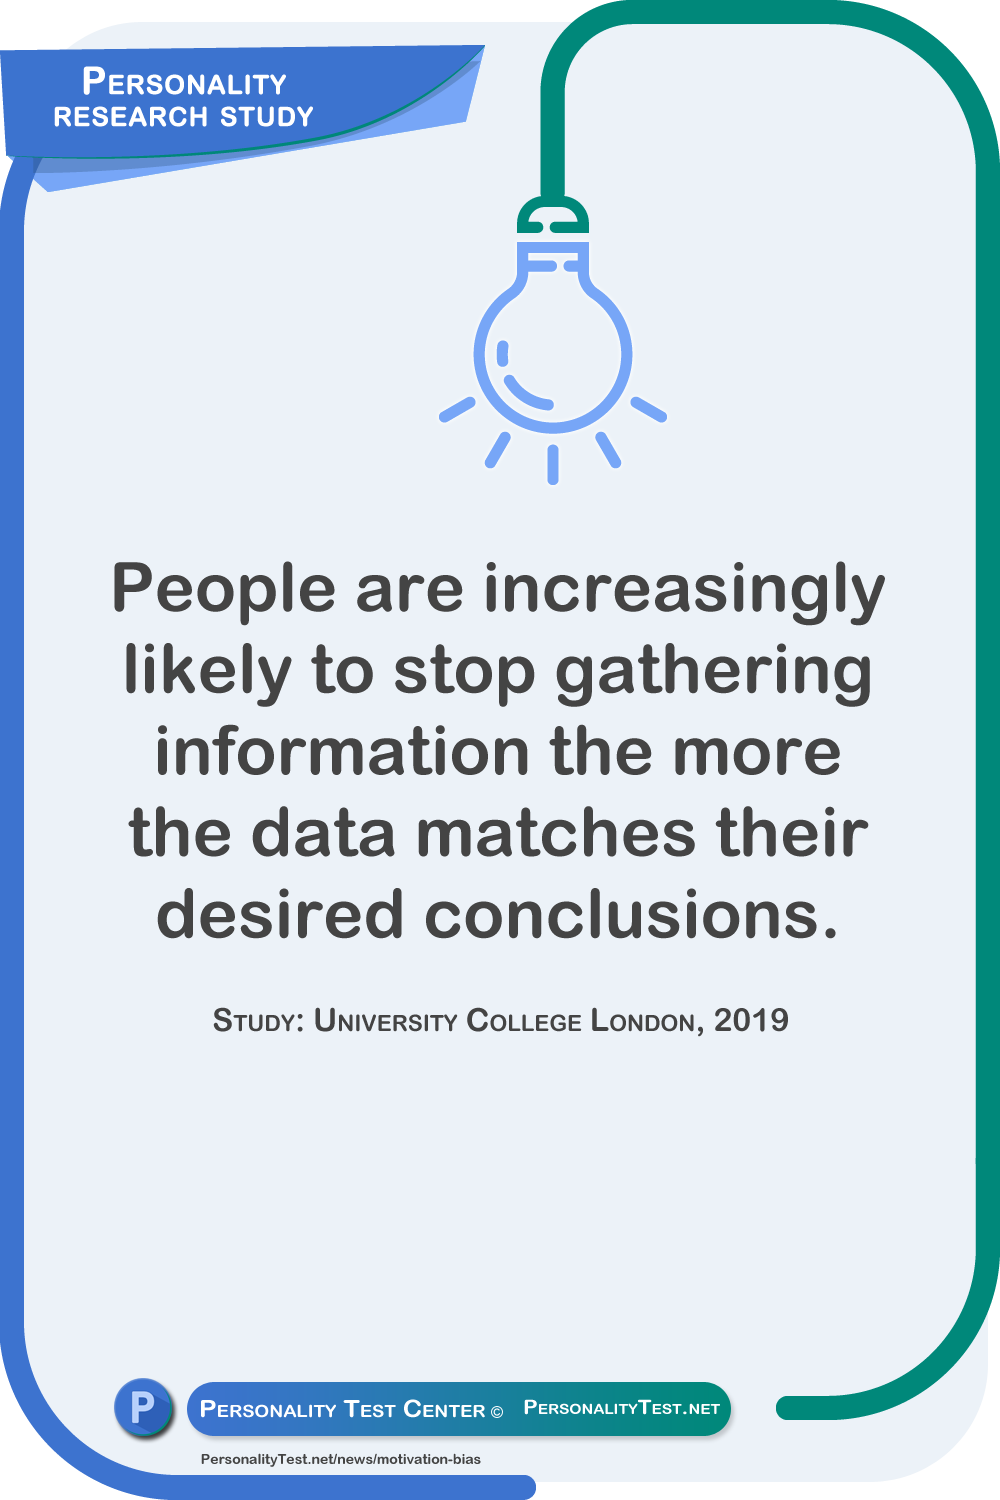 People are increasingly likely to stop gathering information the more the data matches their desired conclusions. Study: University College London, 2019